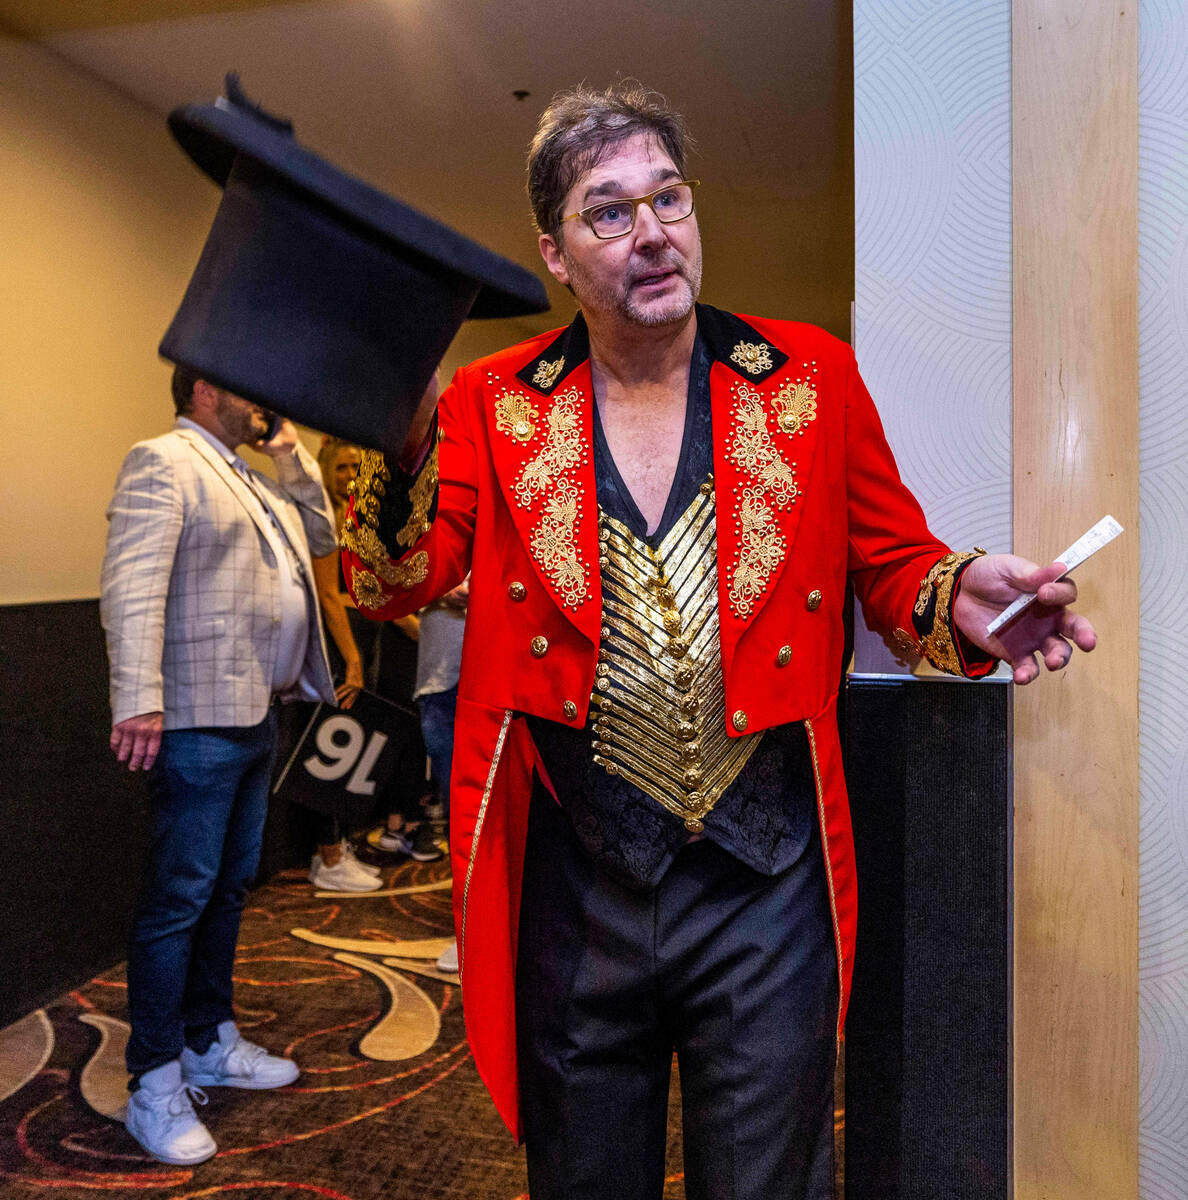 Phil Hellmuth tips his hat as the “The Greatest Showman!" Before his entrance durin ...